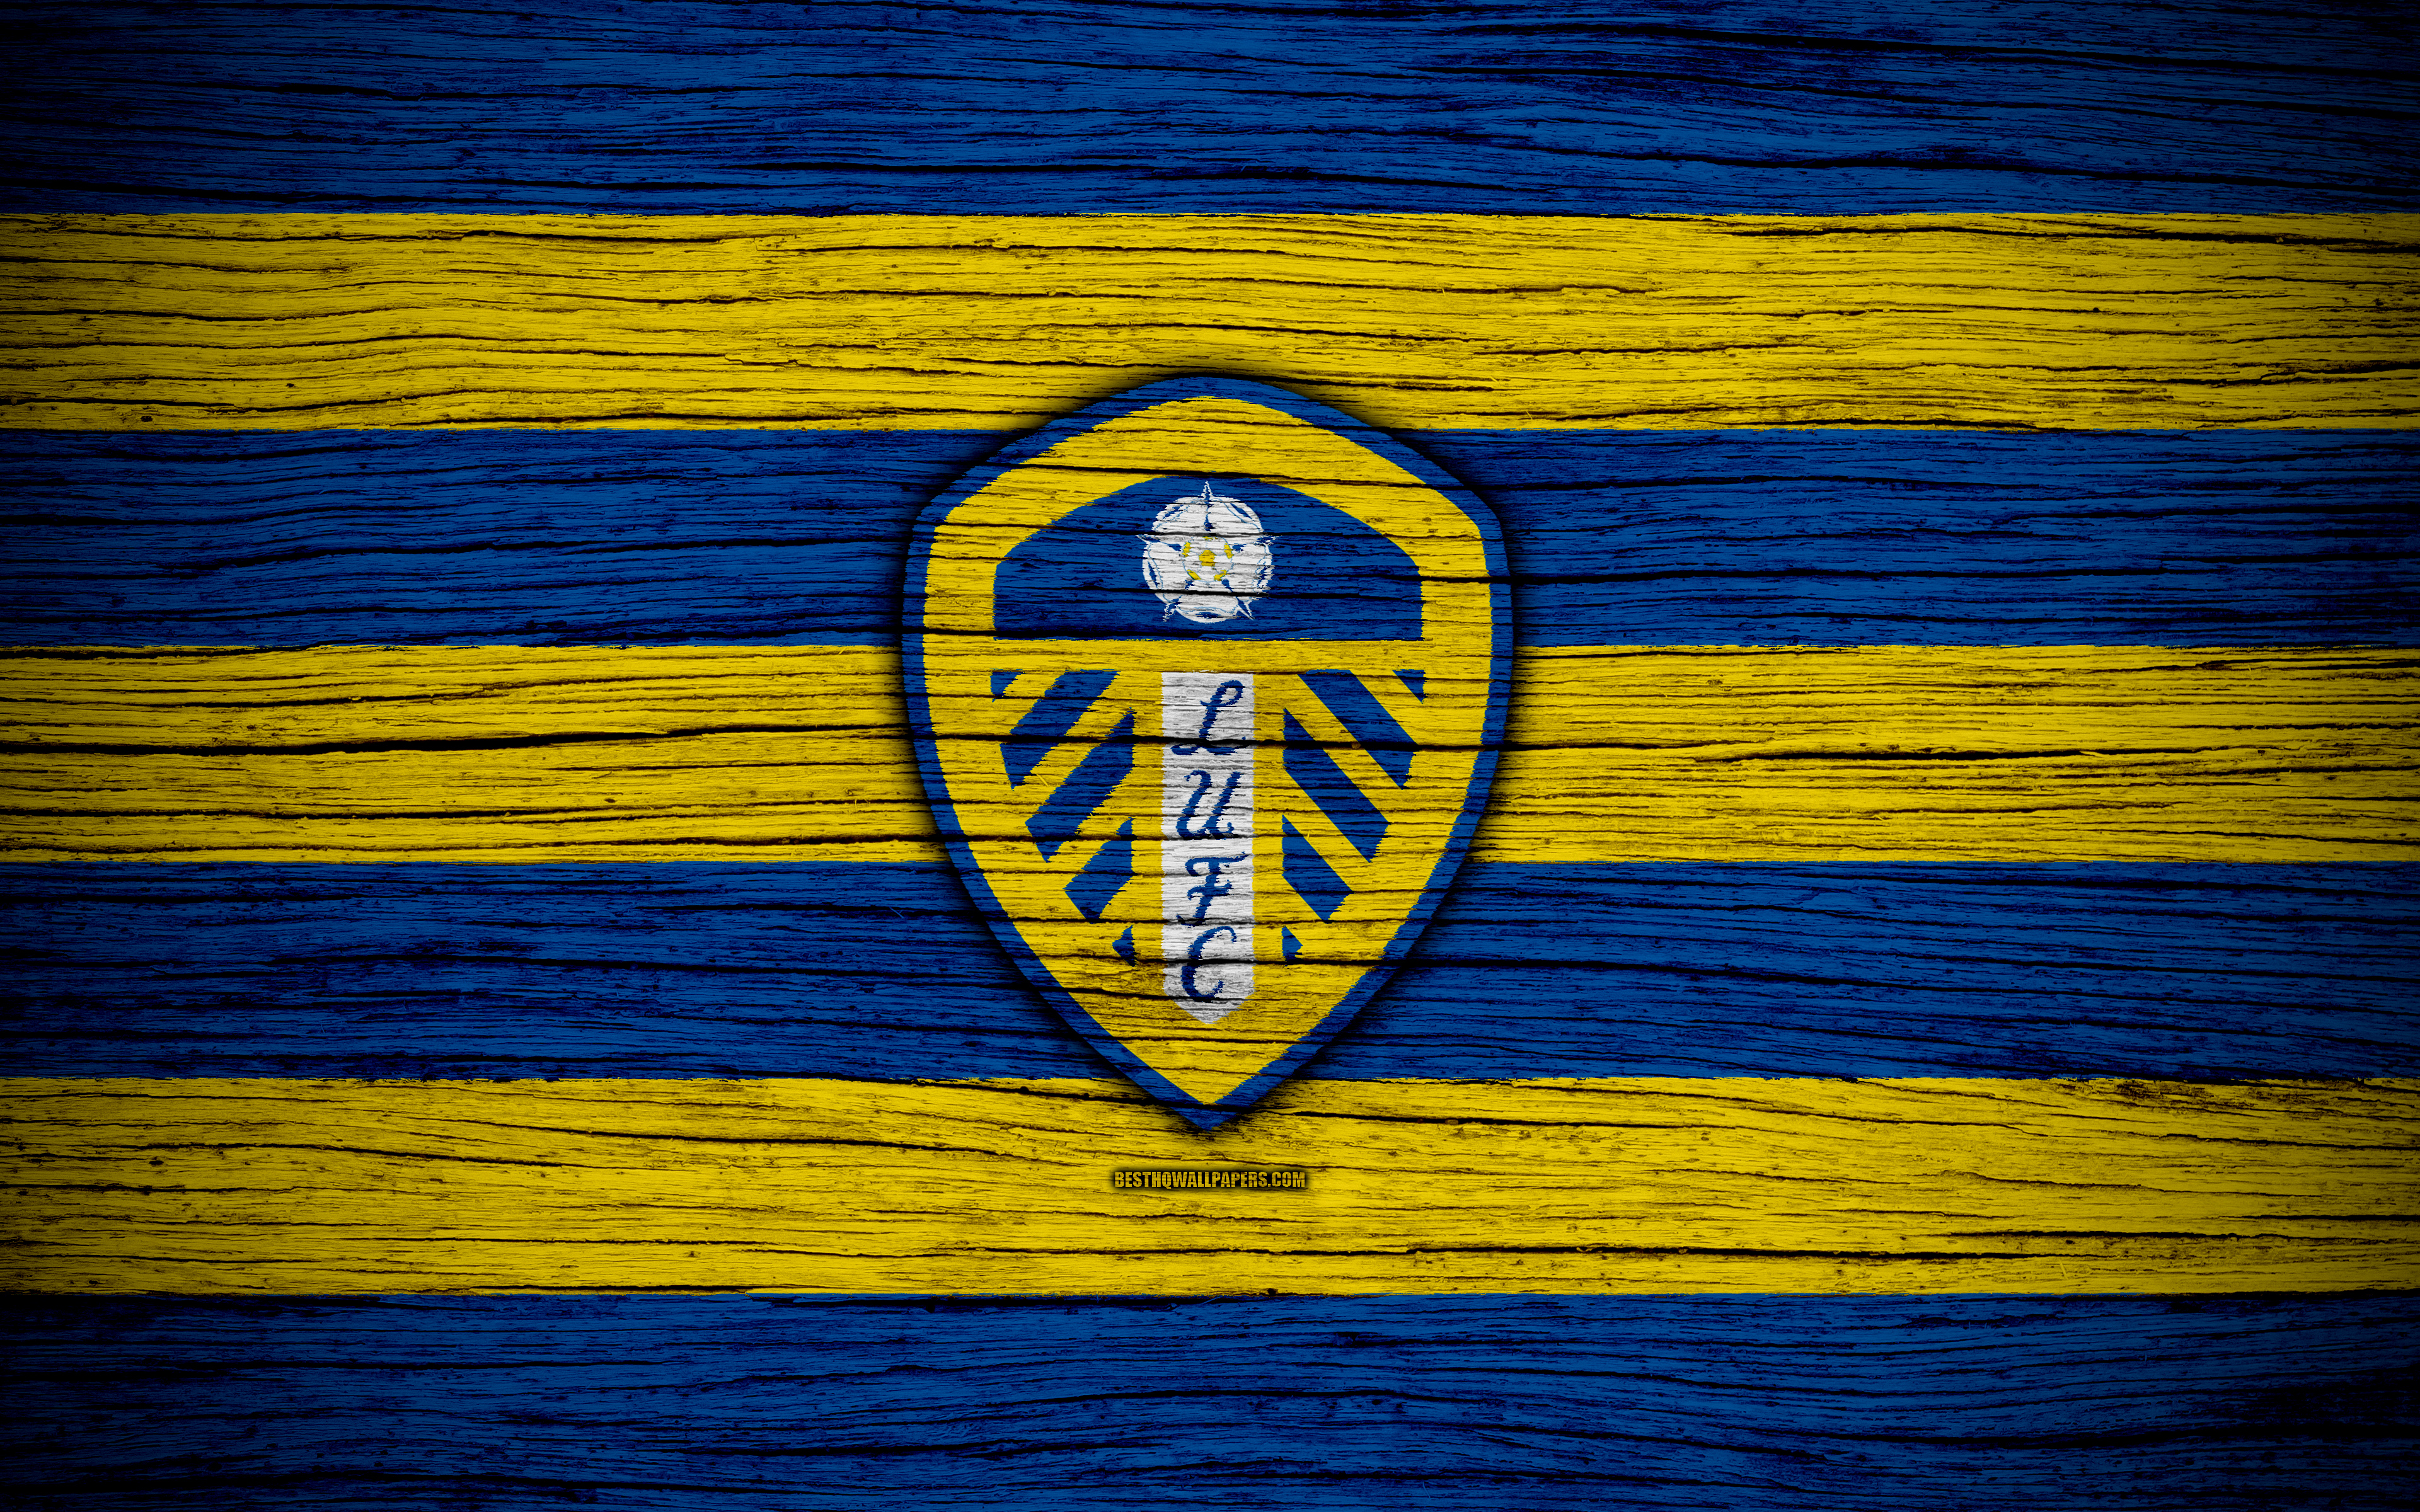 Download wallpaper Leeds United FC, 4k, EFL Championship, soccer, football club, England, Leeds United, logo, wooden texture, FC Leeds United for desktop with resolution 3840x2400. High Quality HD picture wallpaper